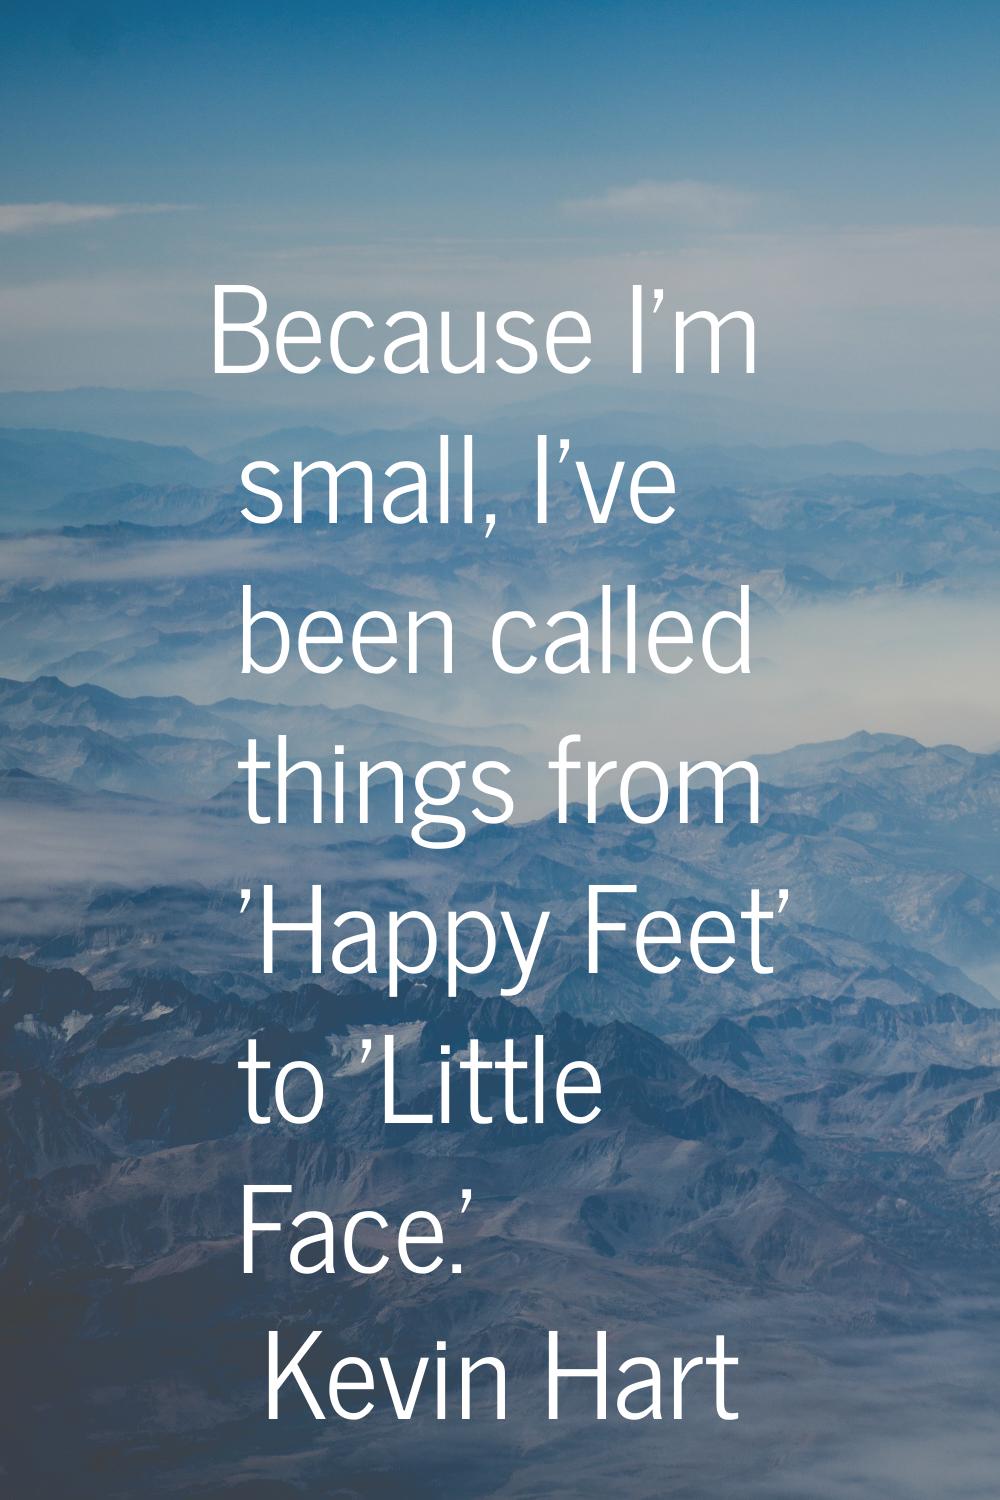 Because I'm small, I've been called things from 'Happy Feet' to 'Little Face.'